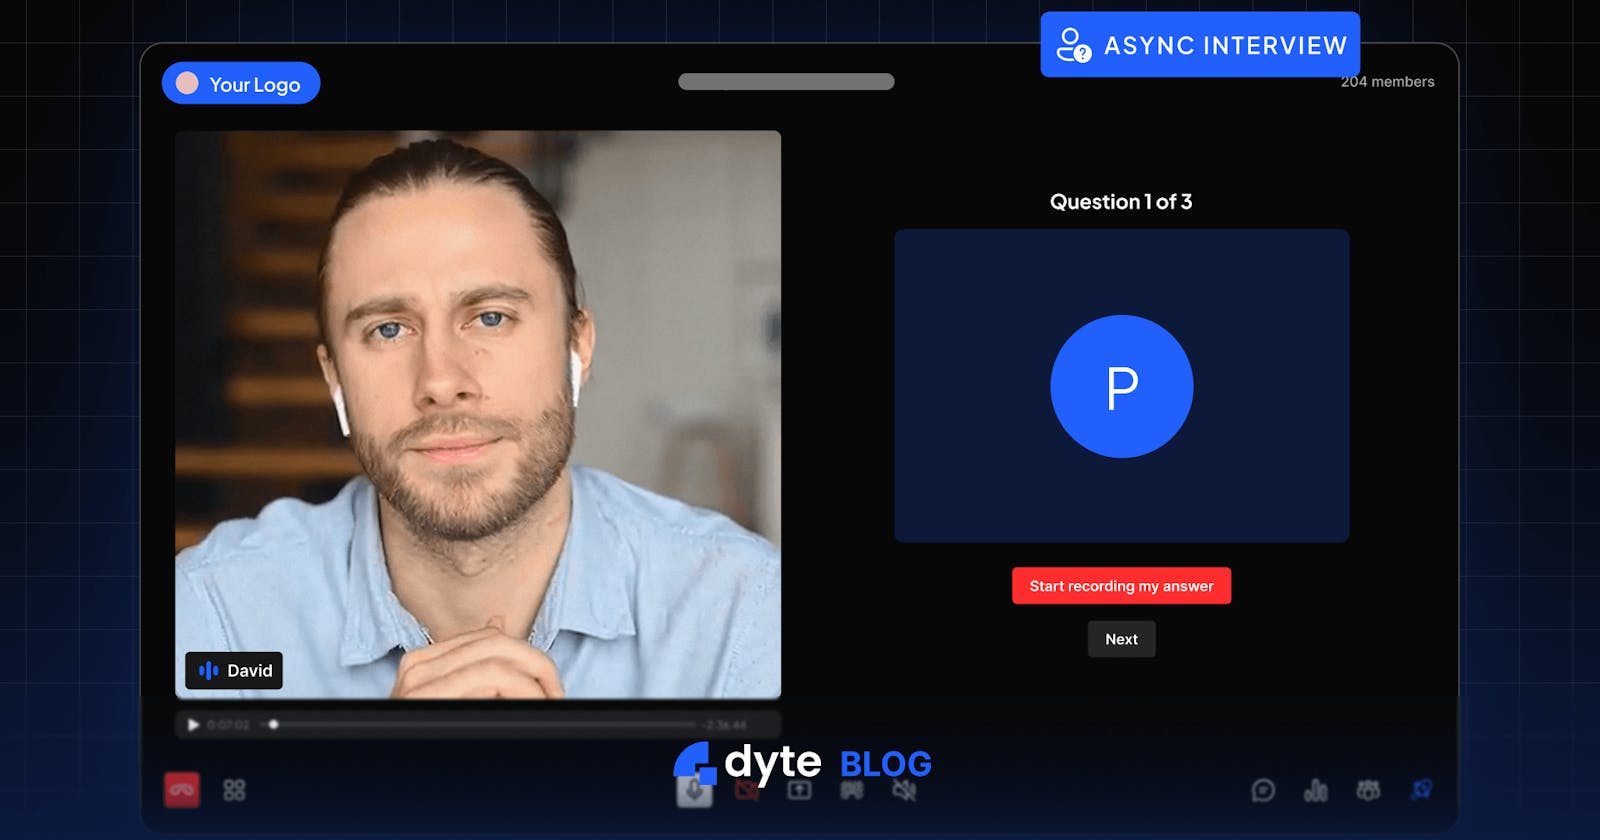 Building an Async Interview Platform With React and Dyte